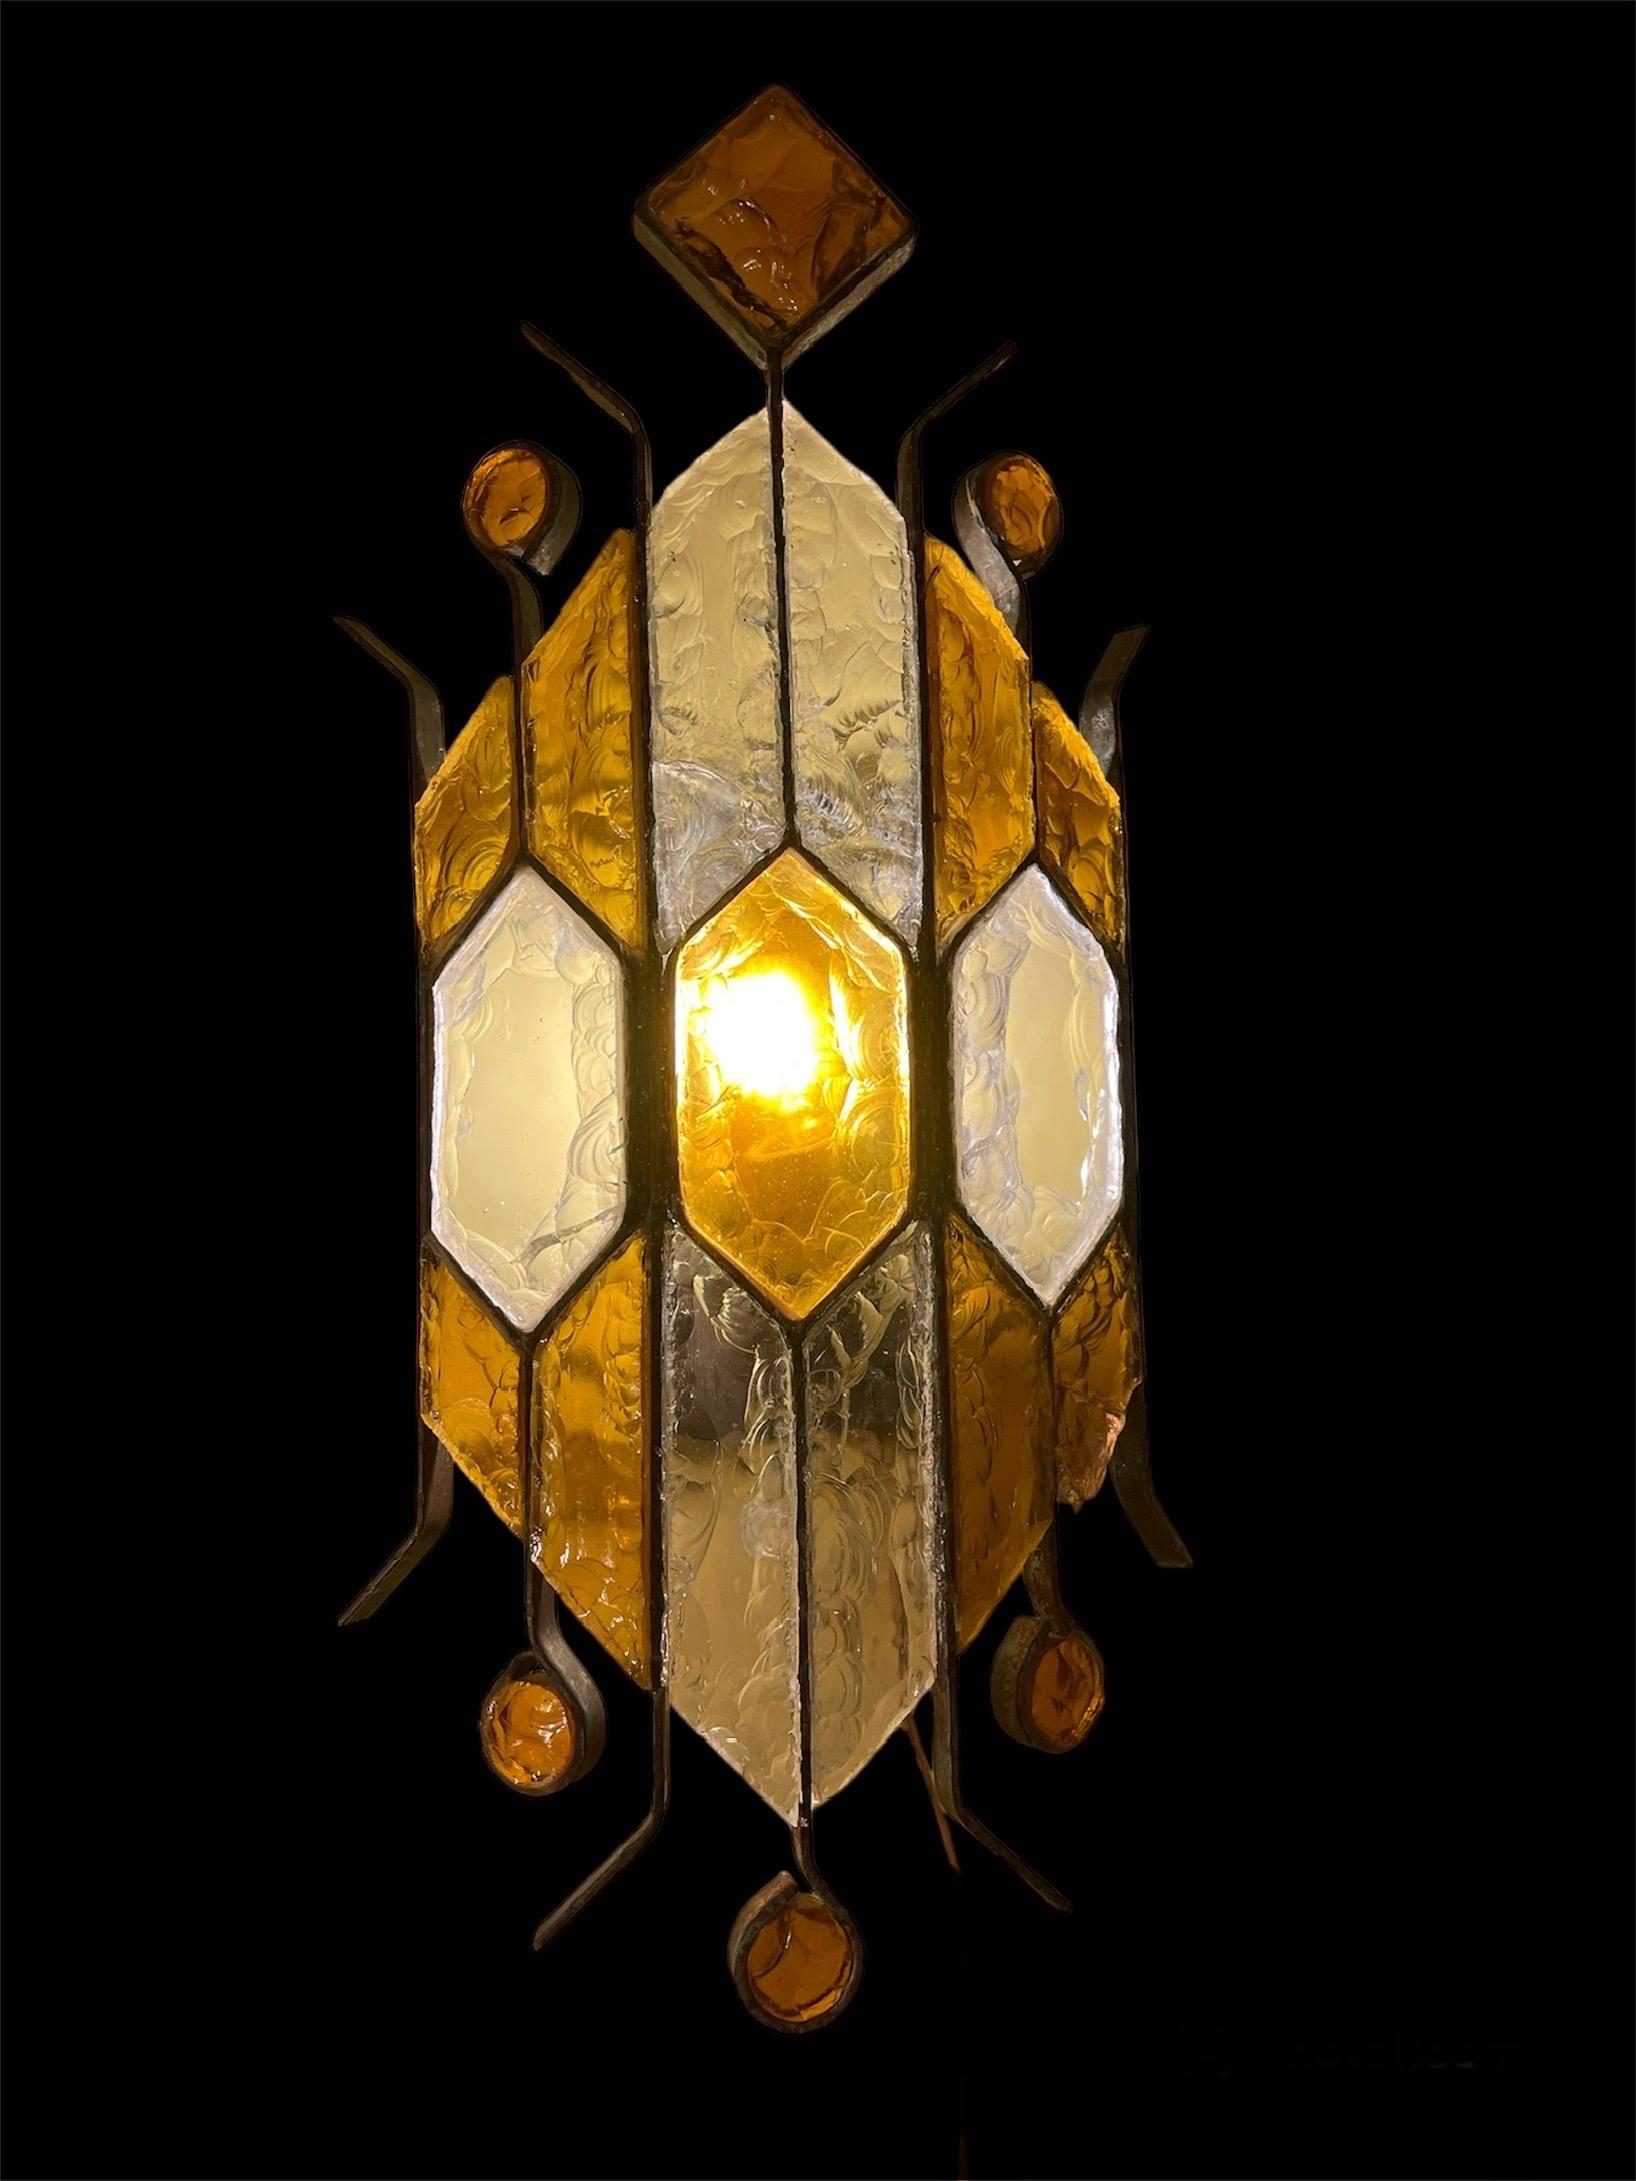 Exceptional Longobard wall lighting large bicolore glass Murano with structure . The Design and the quality of the glass make this piece the best of the italian Design .
This unique Longobard wall lighting in bicolore glass murano are exceptional